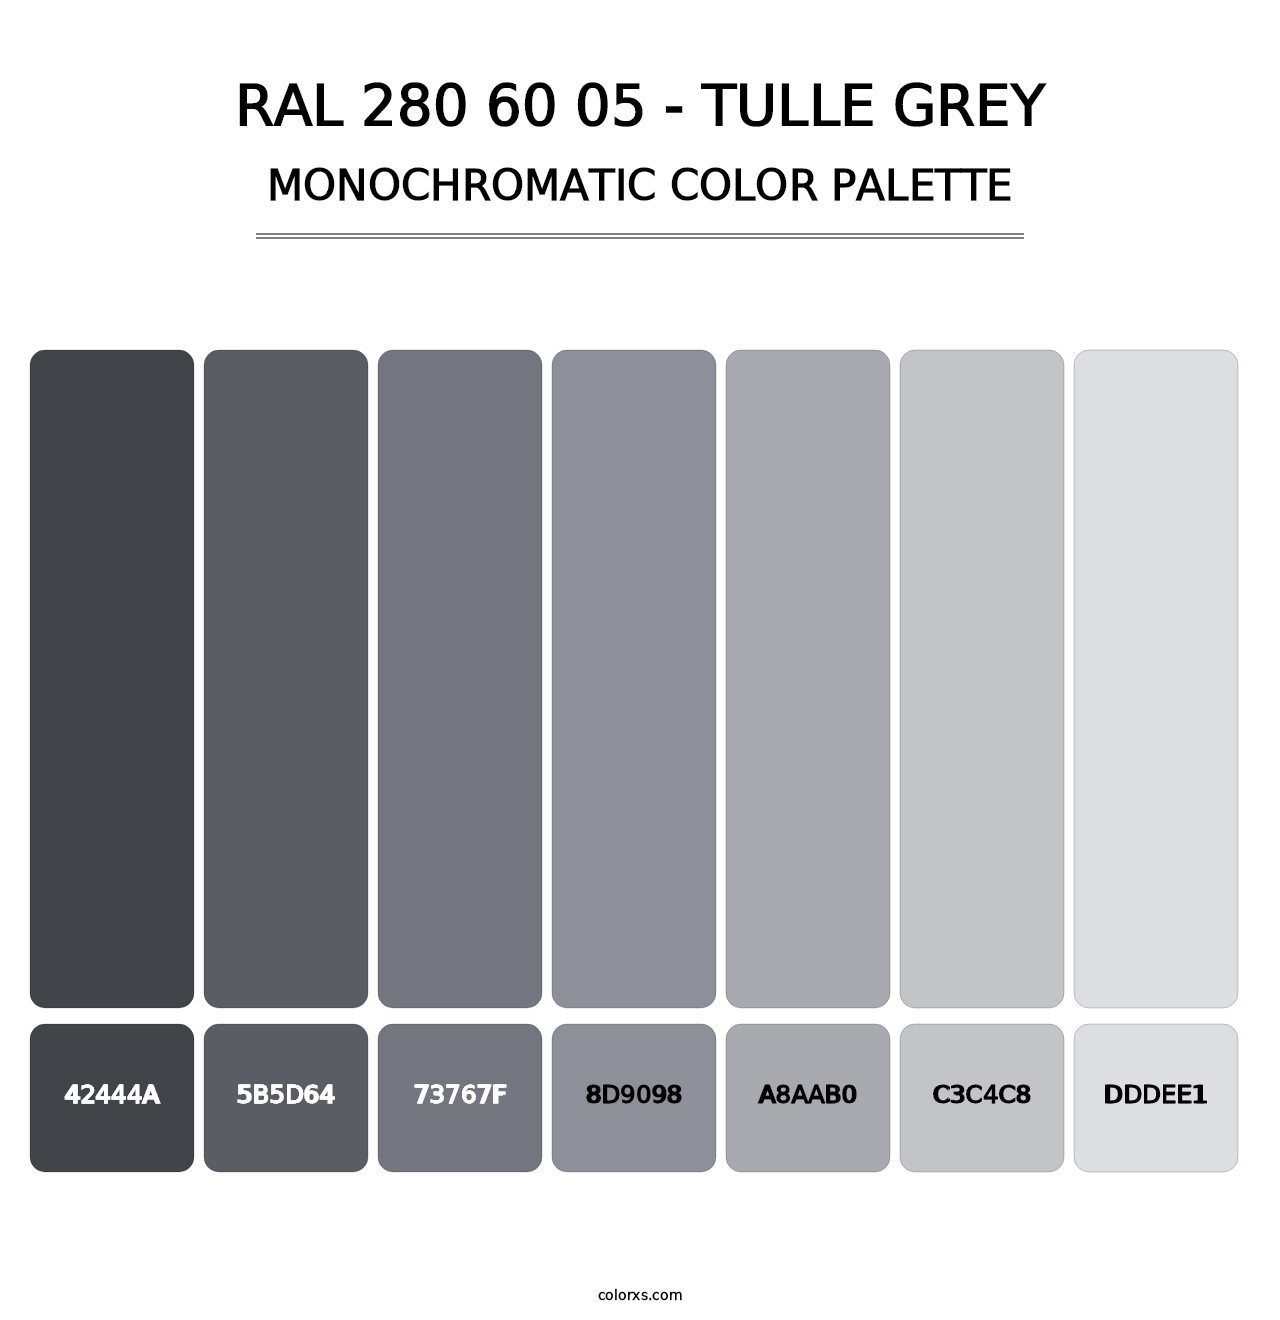 RAL 280 60 05 - Tulle Grey - Monochromatic Color Palette